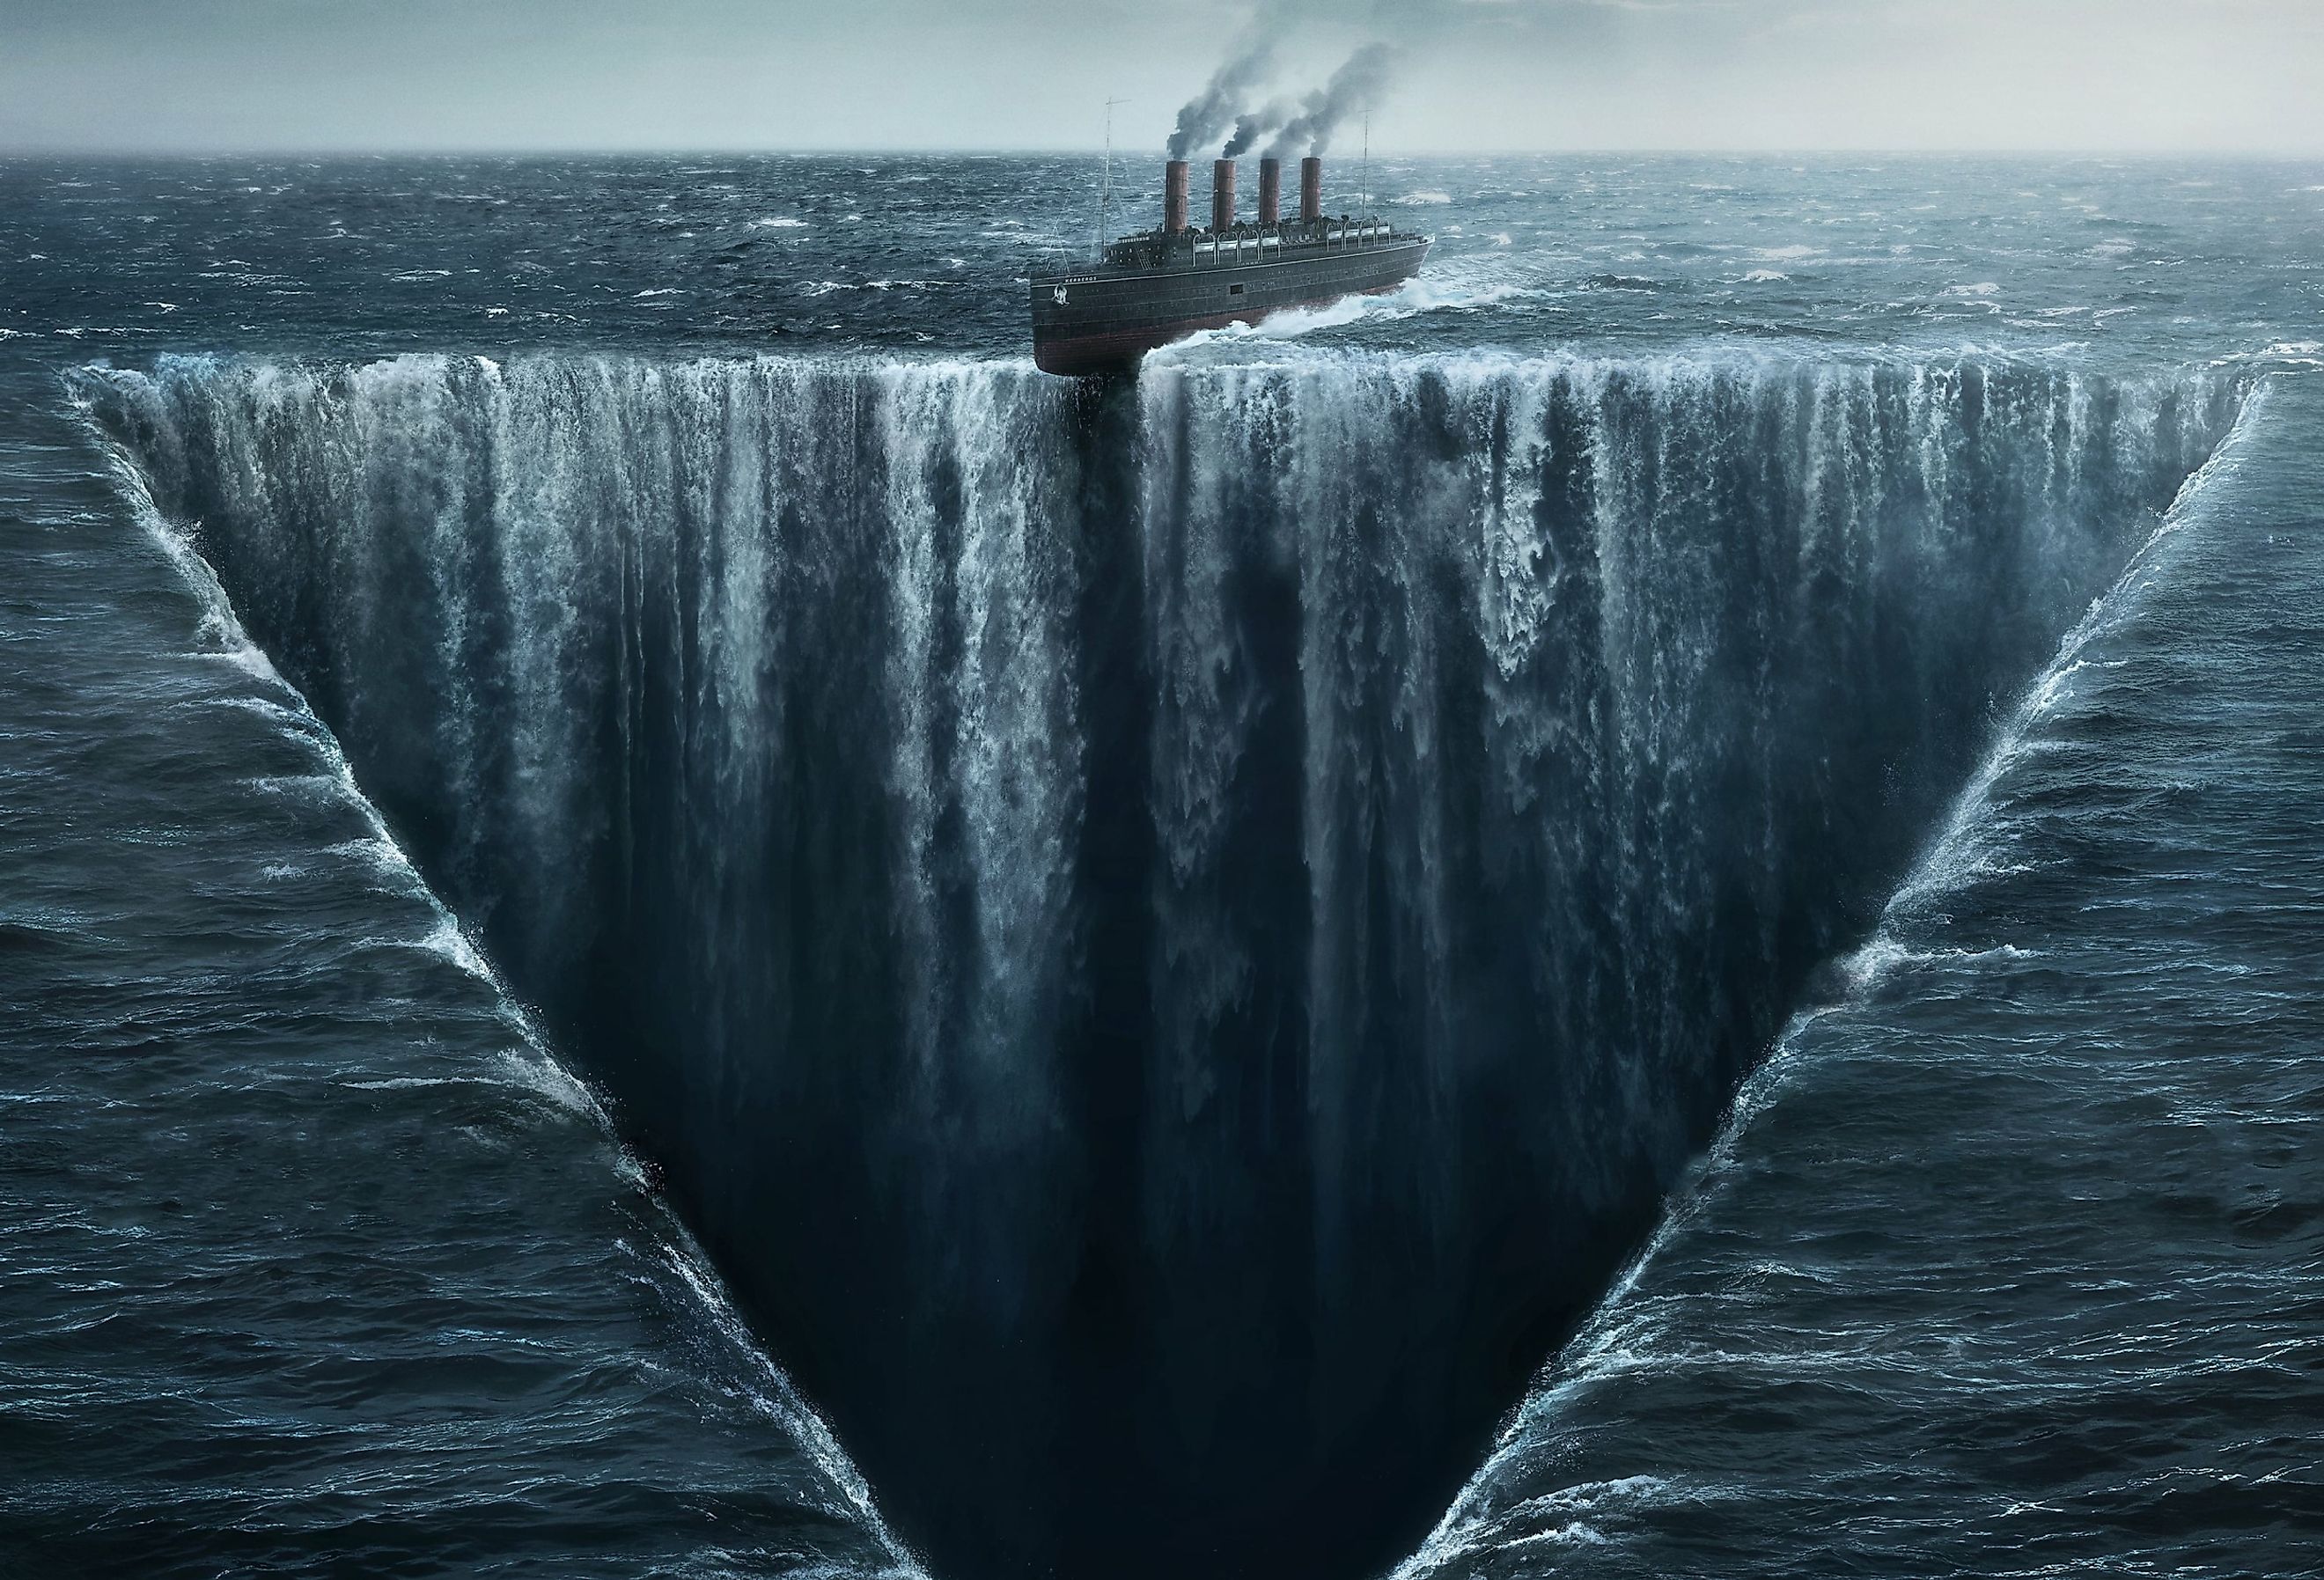 Artist interpretation that depicts the mystery and allure of The Bermuda Triangle.